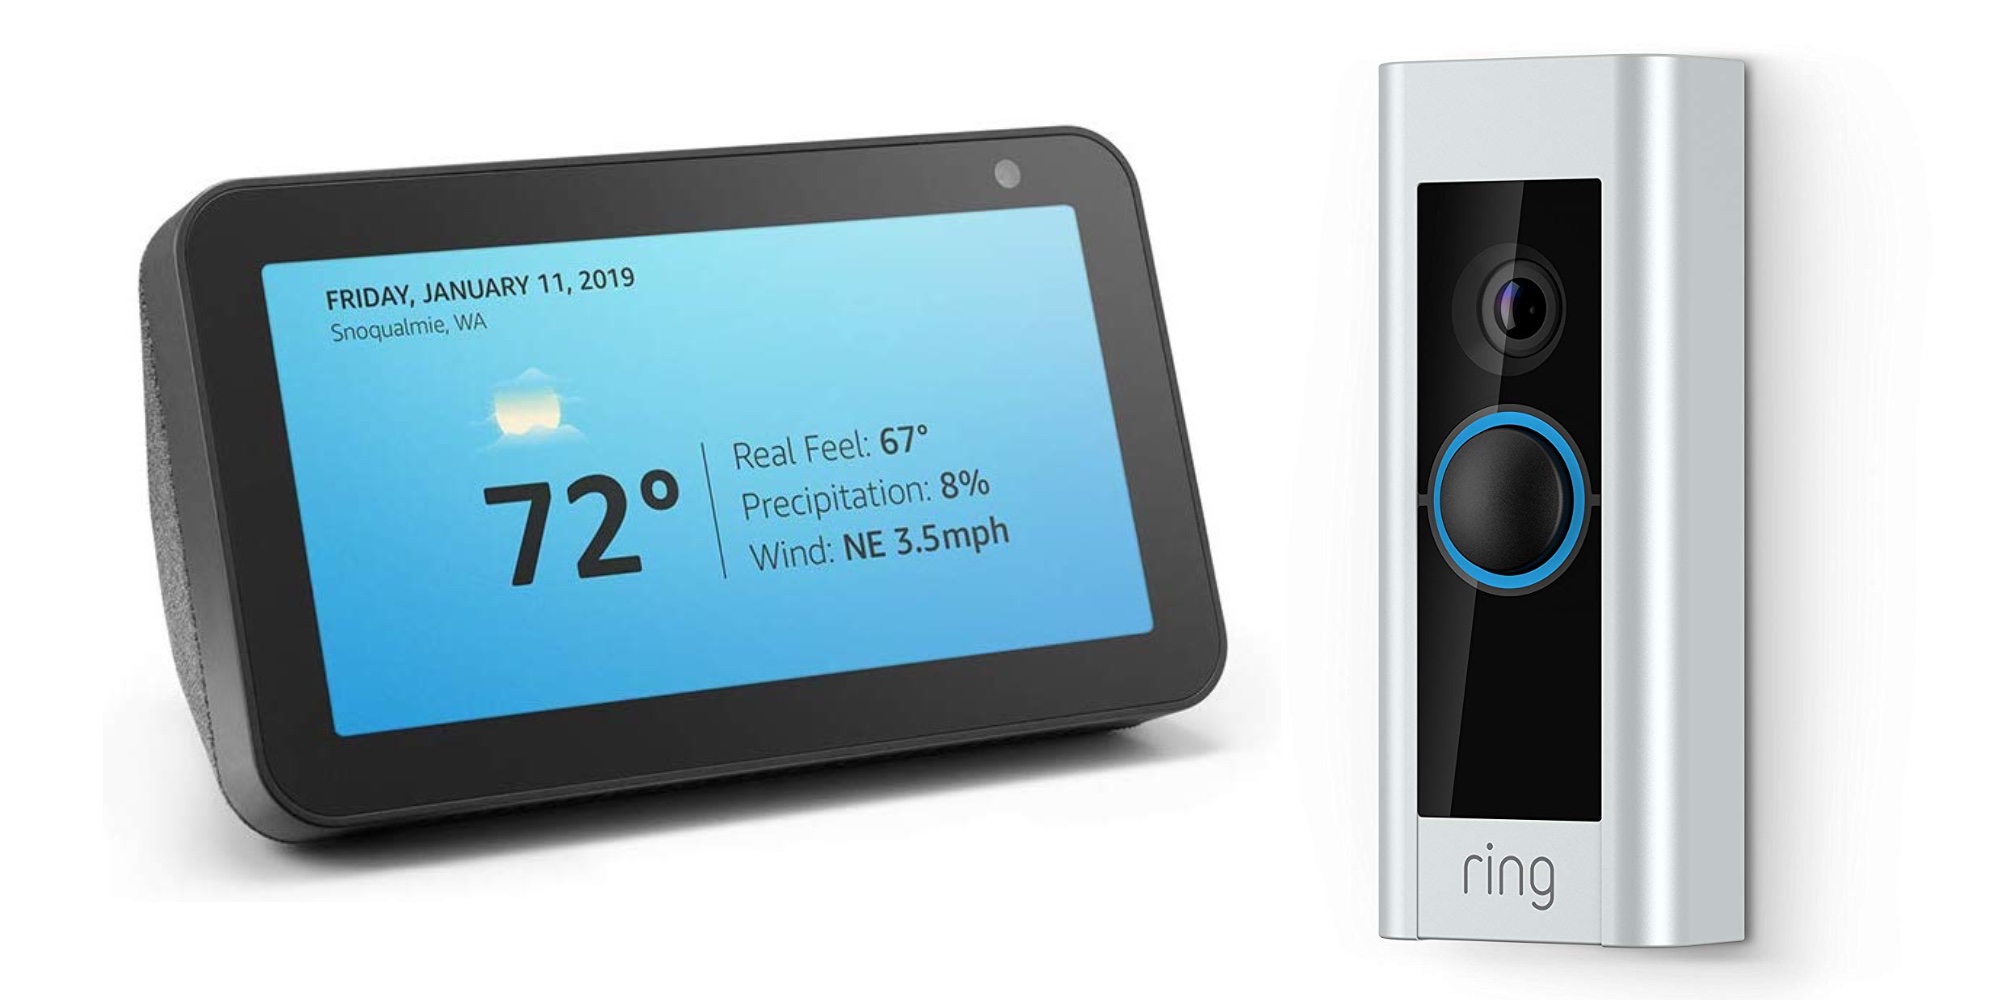 Echo Show 5 comes bundled with Ring Video Doorbell Pro at 179 (160